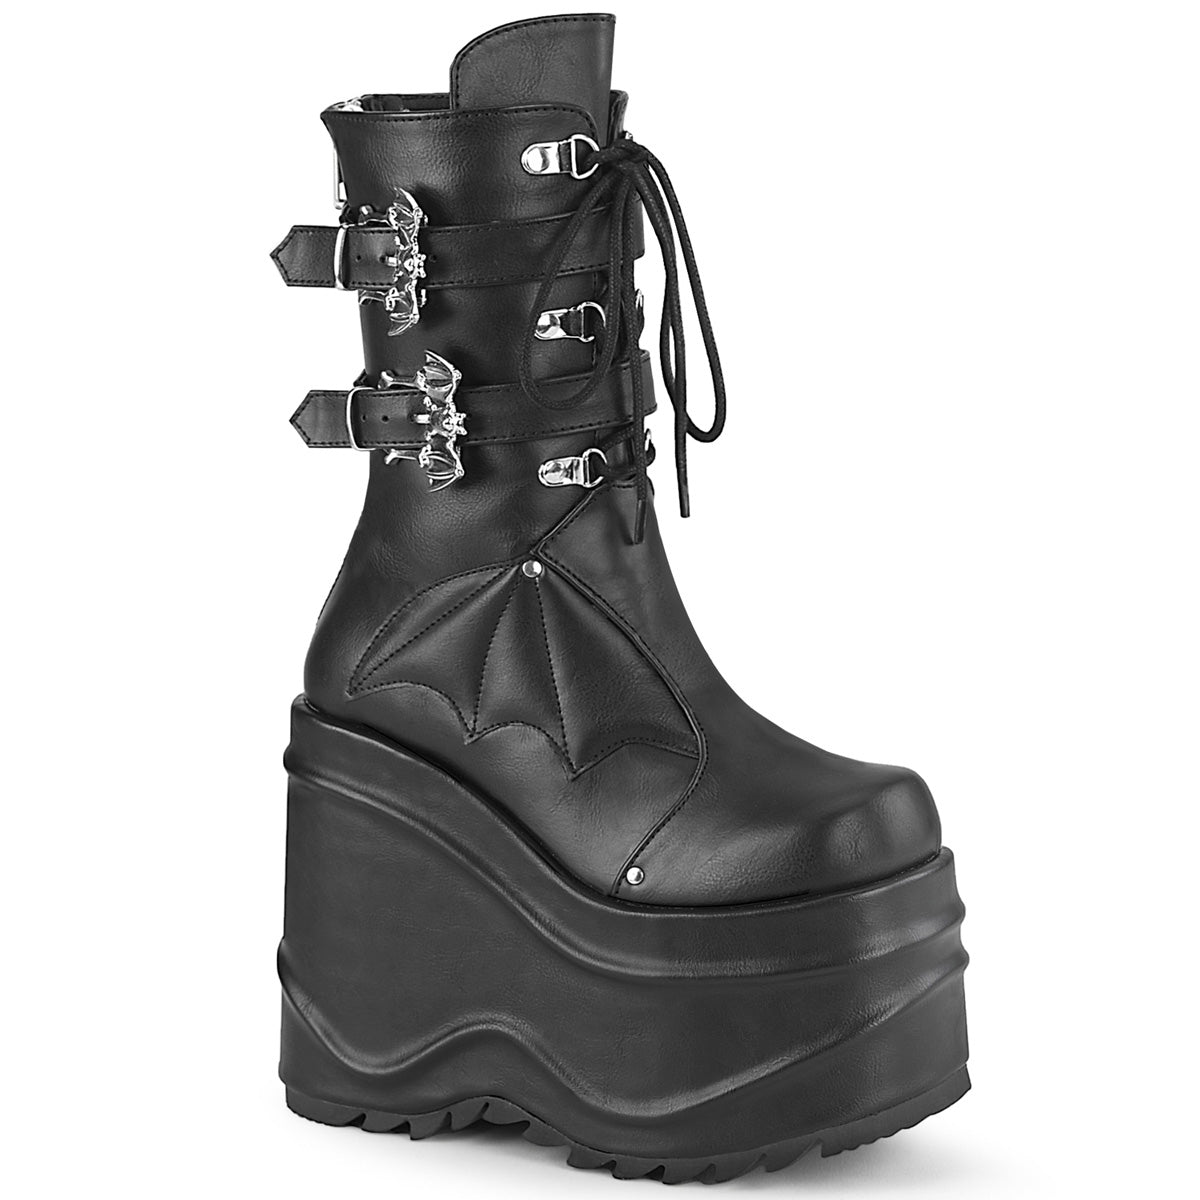 DemoniaCult Womens Boots WAVE-150 Blk Vegan Leather